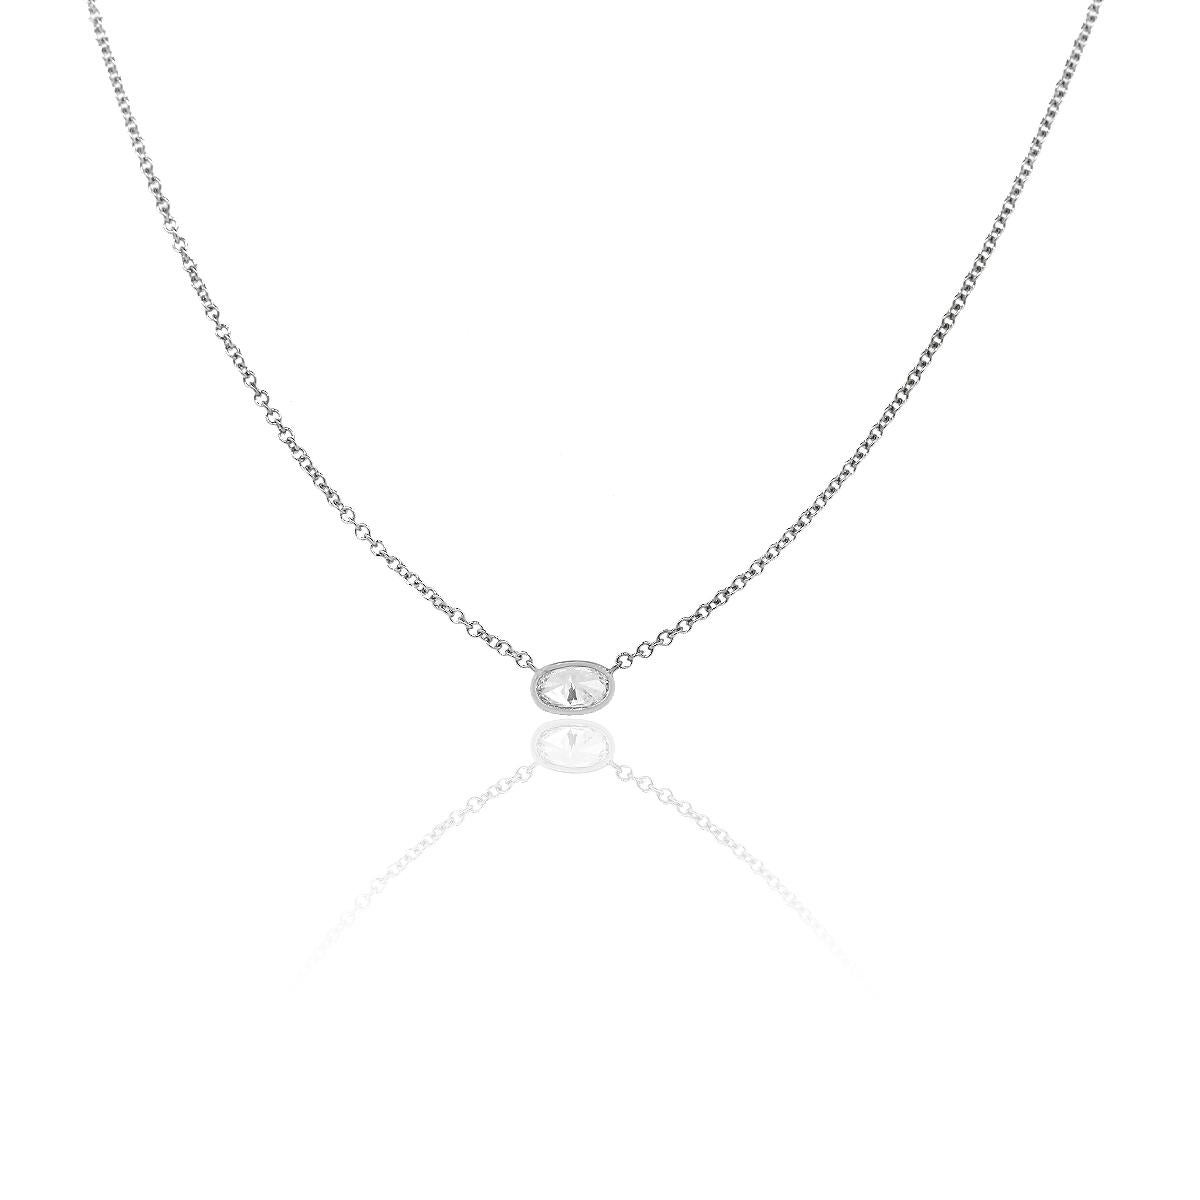 Material: 18k White Gold
Measurements: 18″ in length with shortening of 16